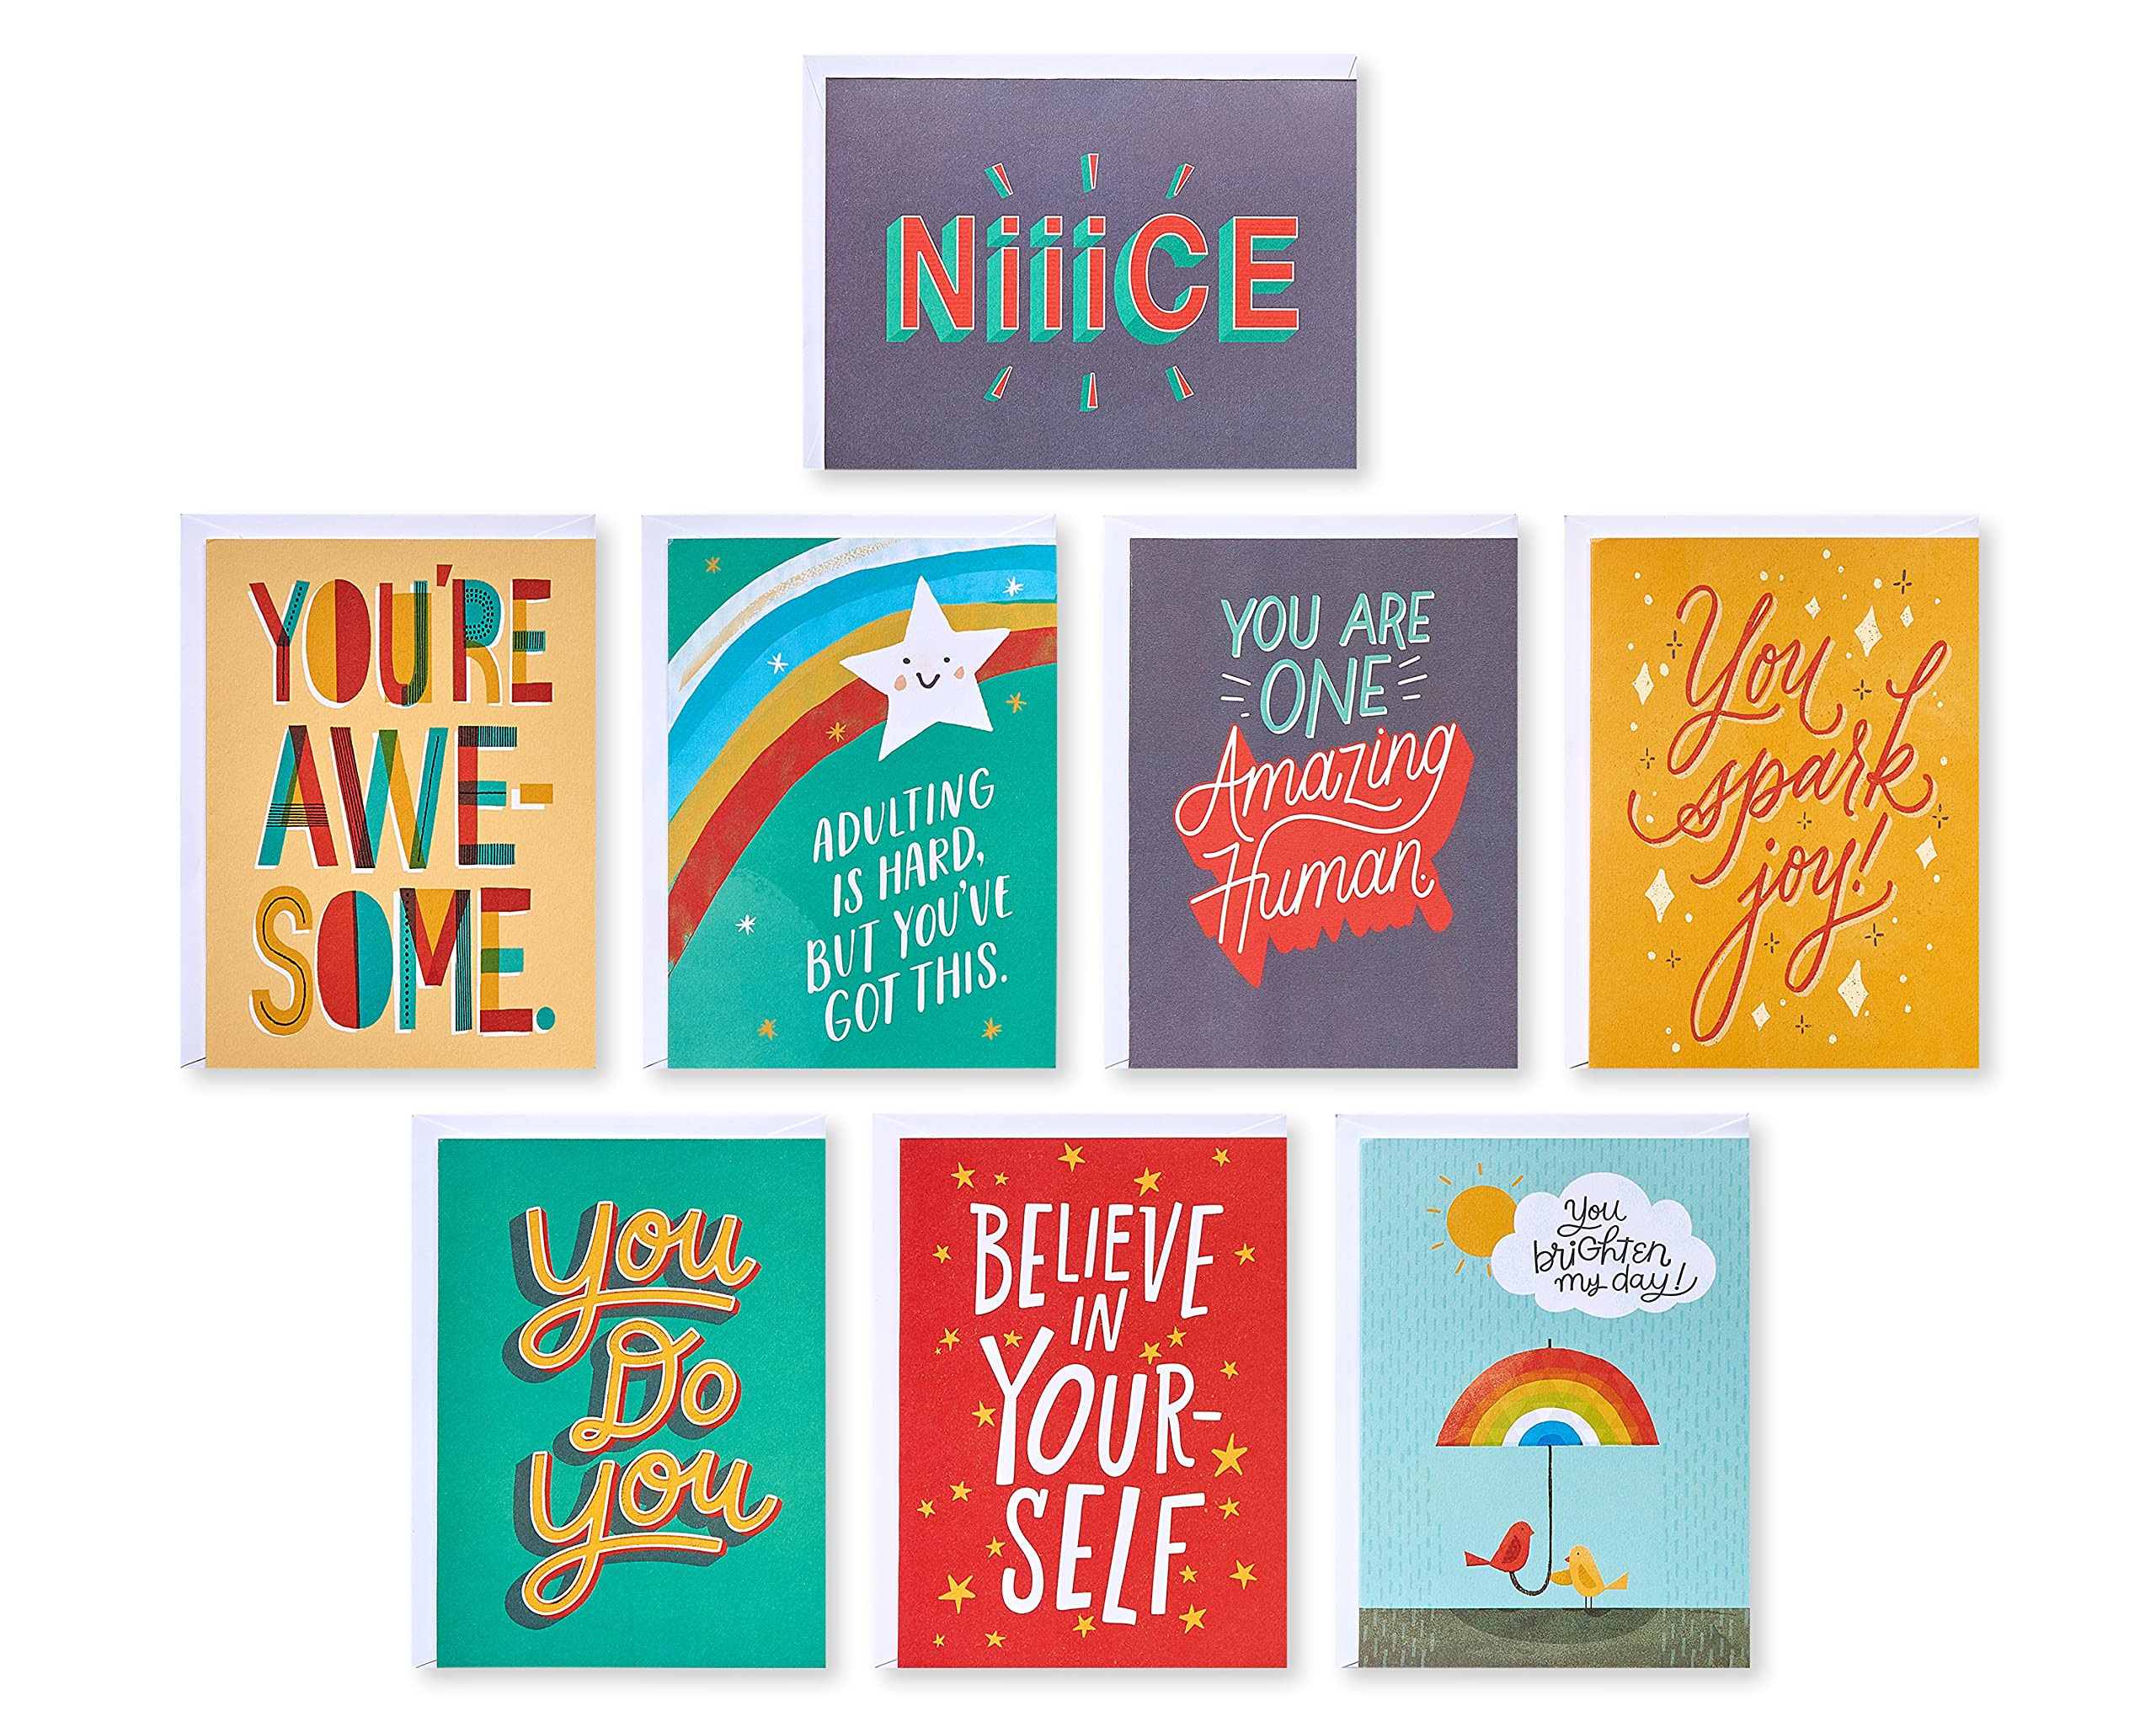 American Greetings Blank Cards with Envelopes for All Occasions, Inspirational, Thank You and Thinking of You (48-Count)